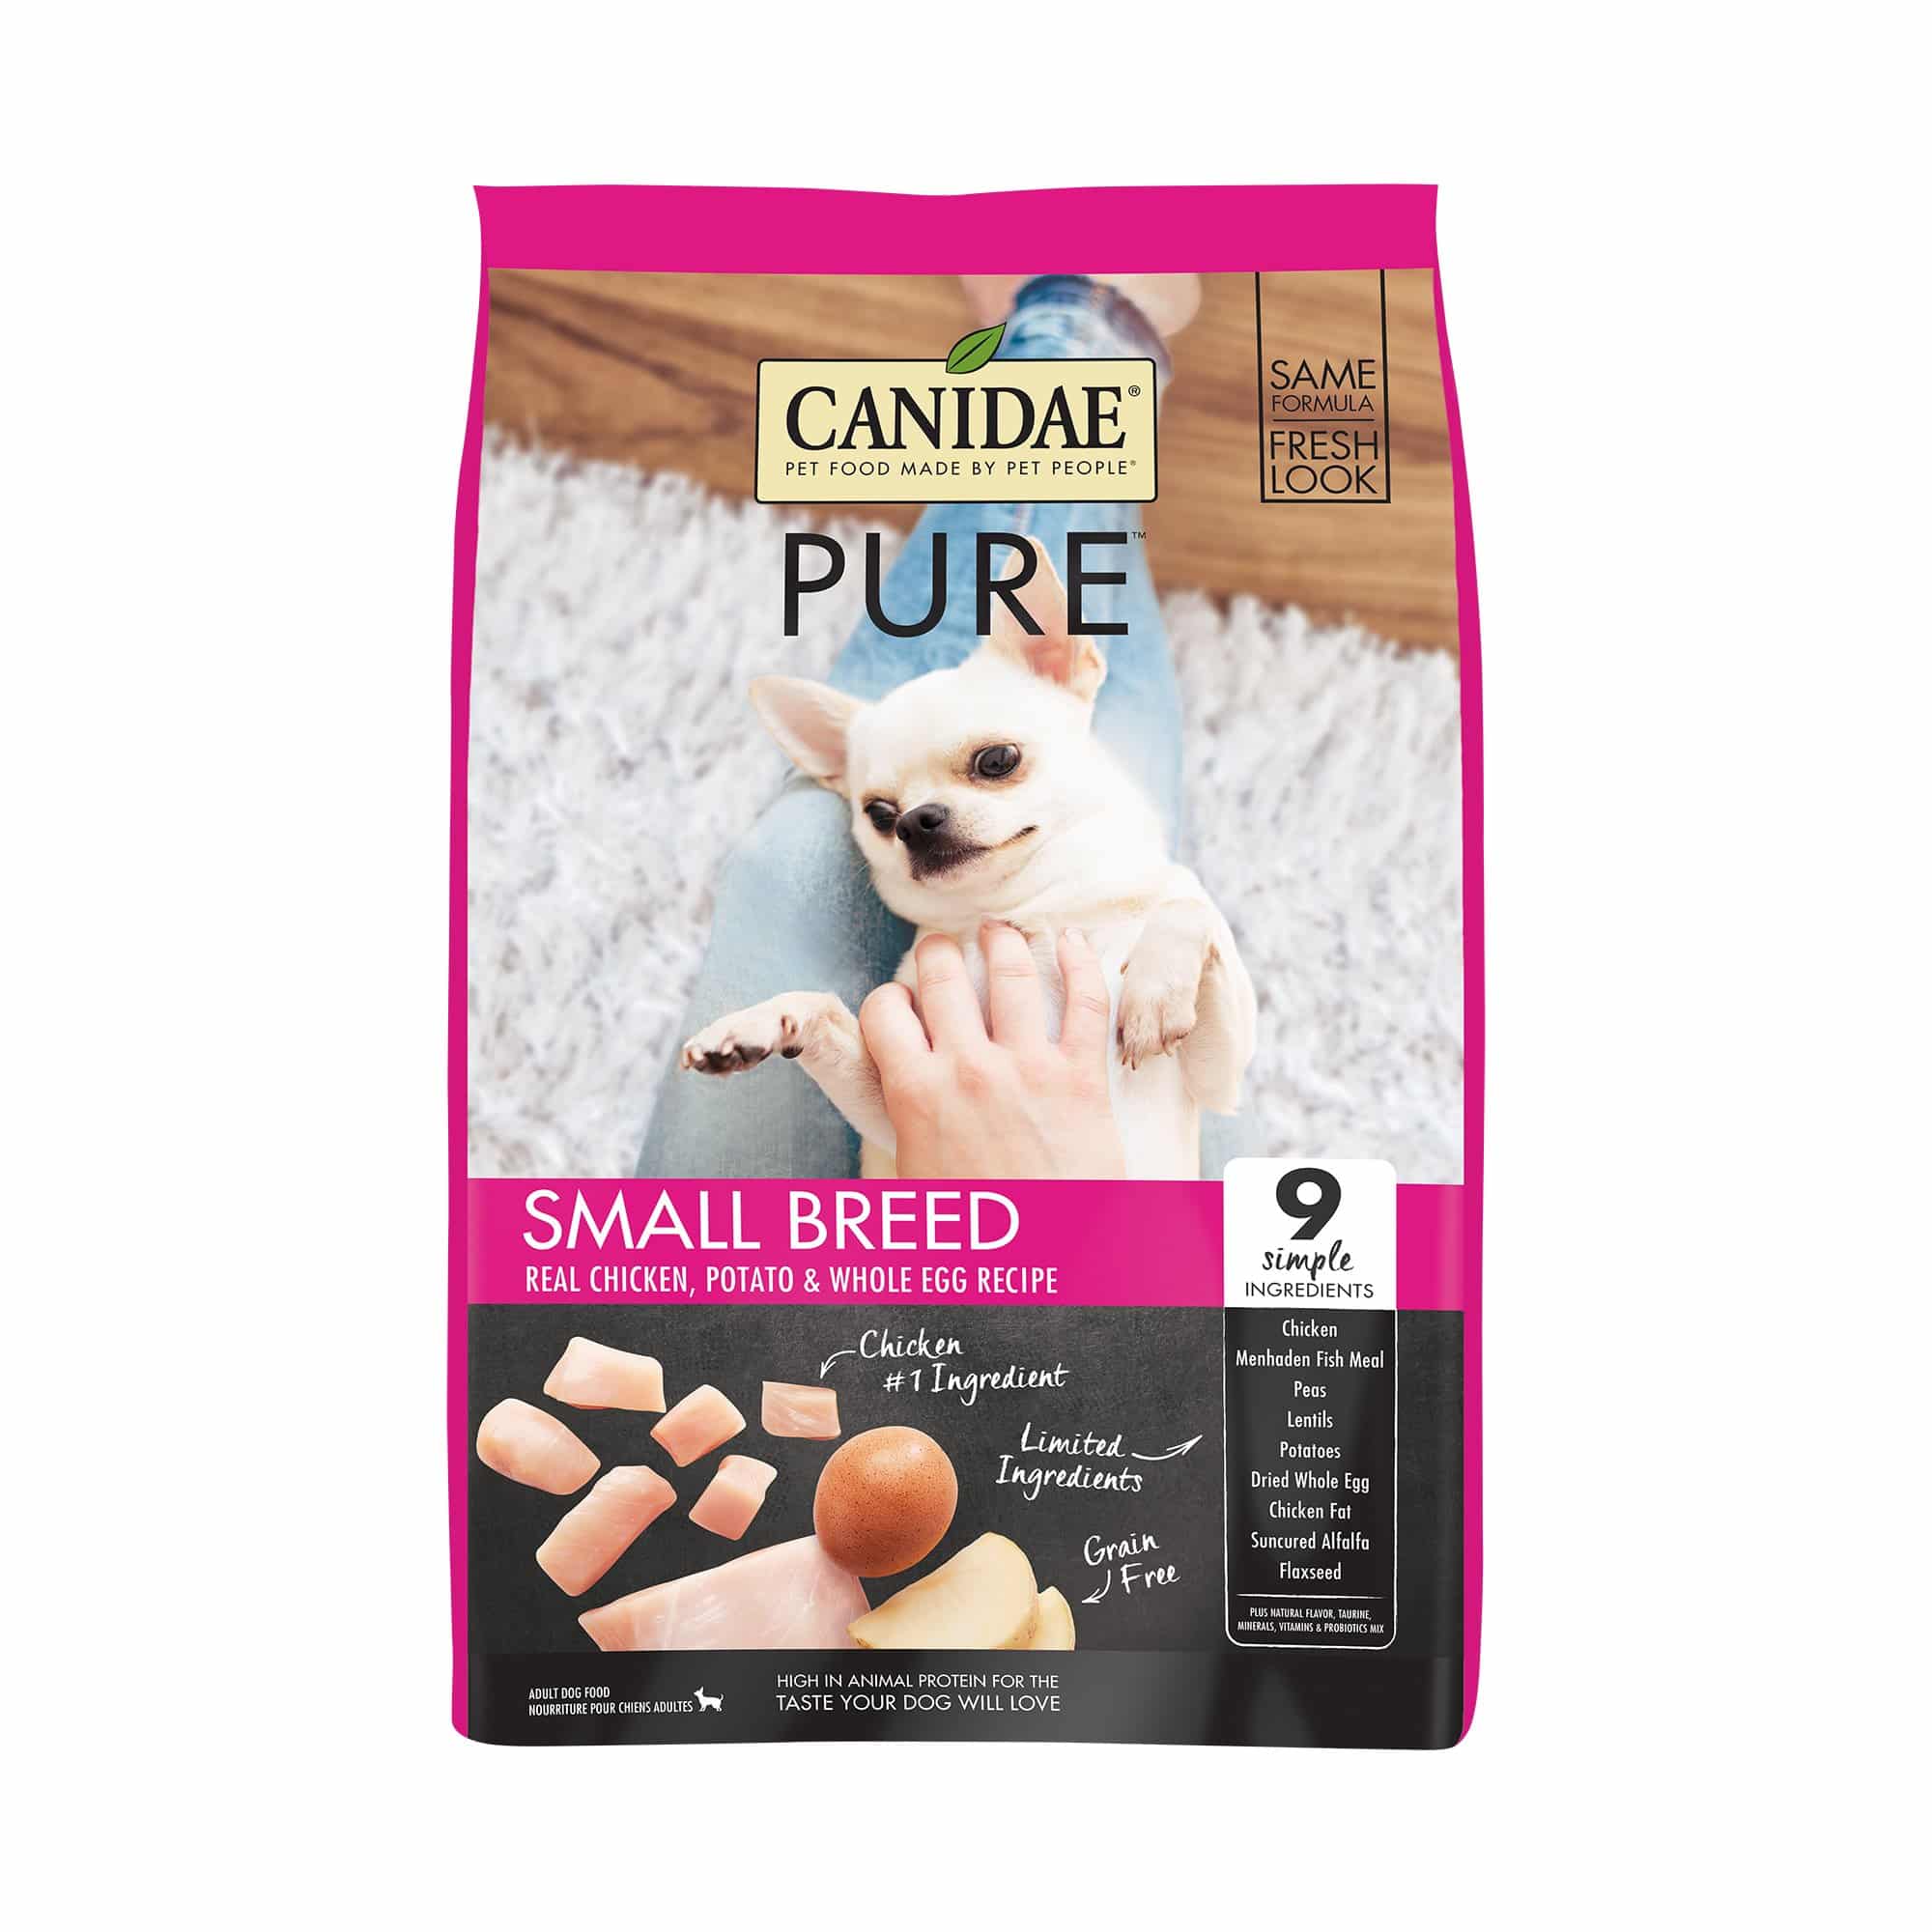 Canidae Grain Free Pure Fields Small Breed Adult Dog Food